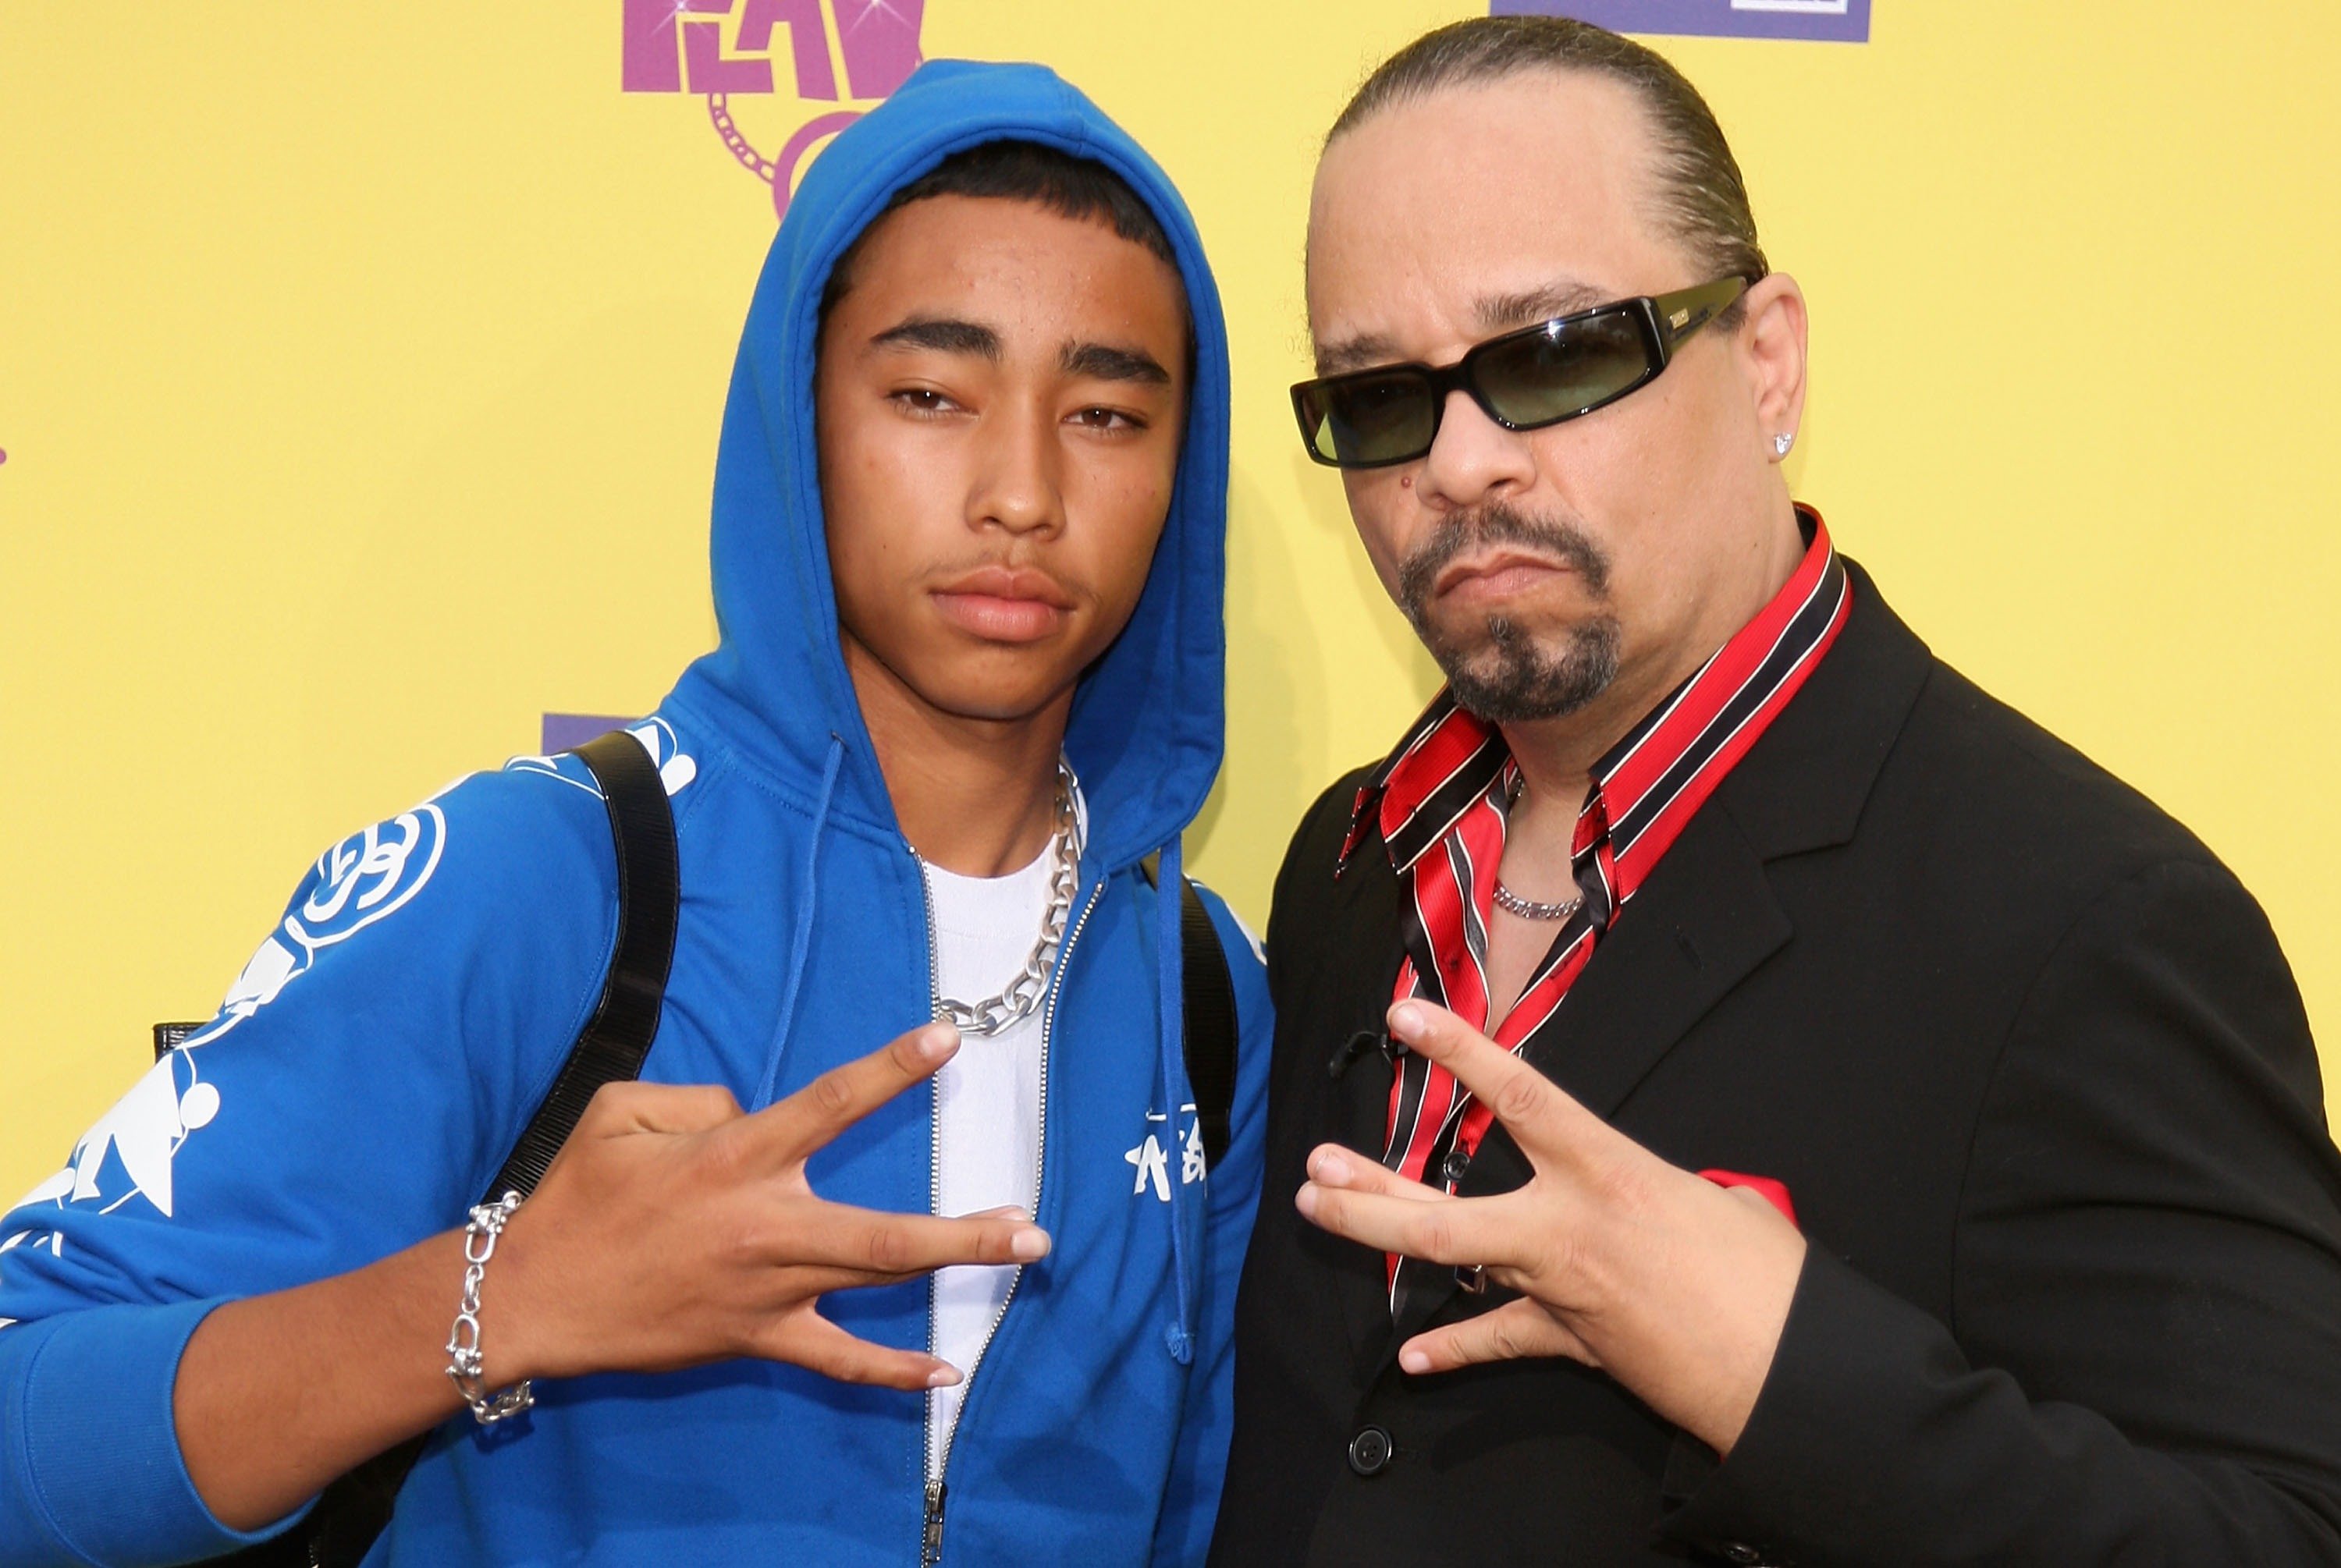 Ice-T and son Tracy Marrow Jr.at the Comedy Central Roast of Flavor Flav in 2007, in Burbank, California. | Source: Getty Images